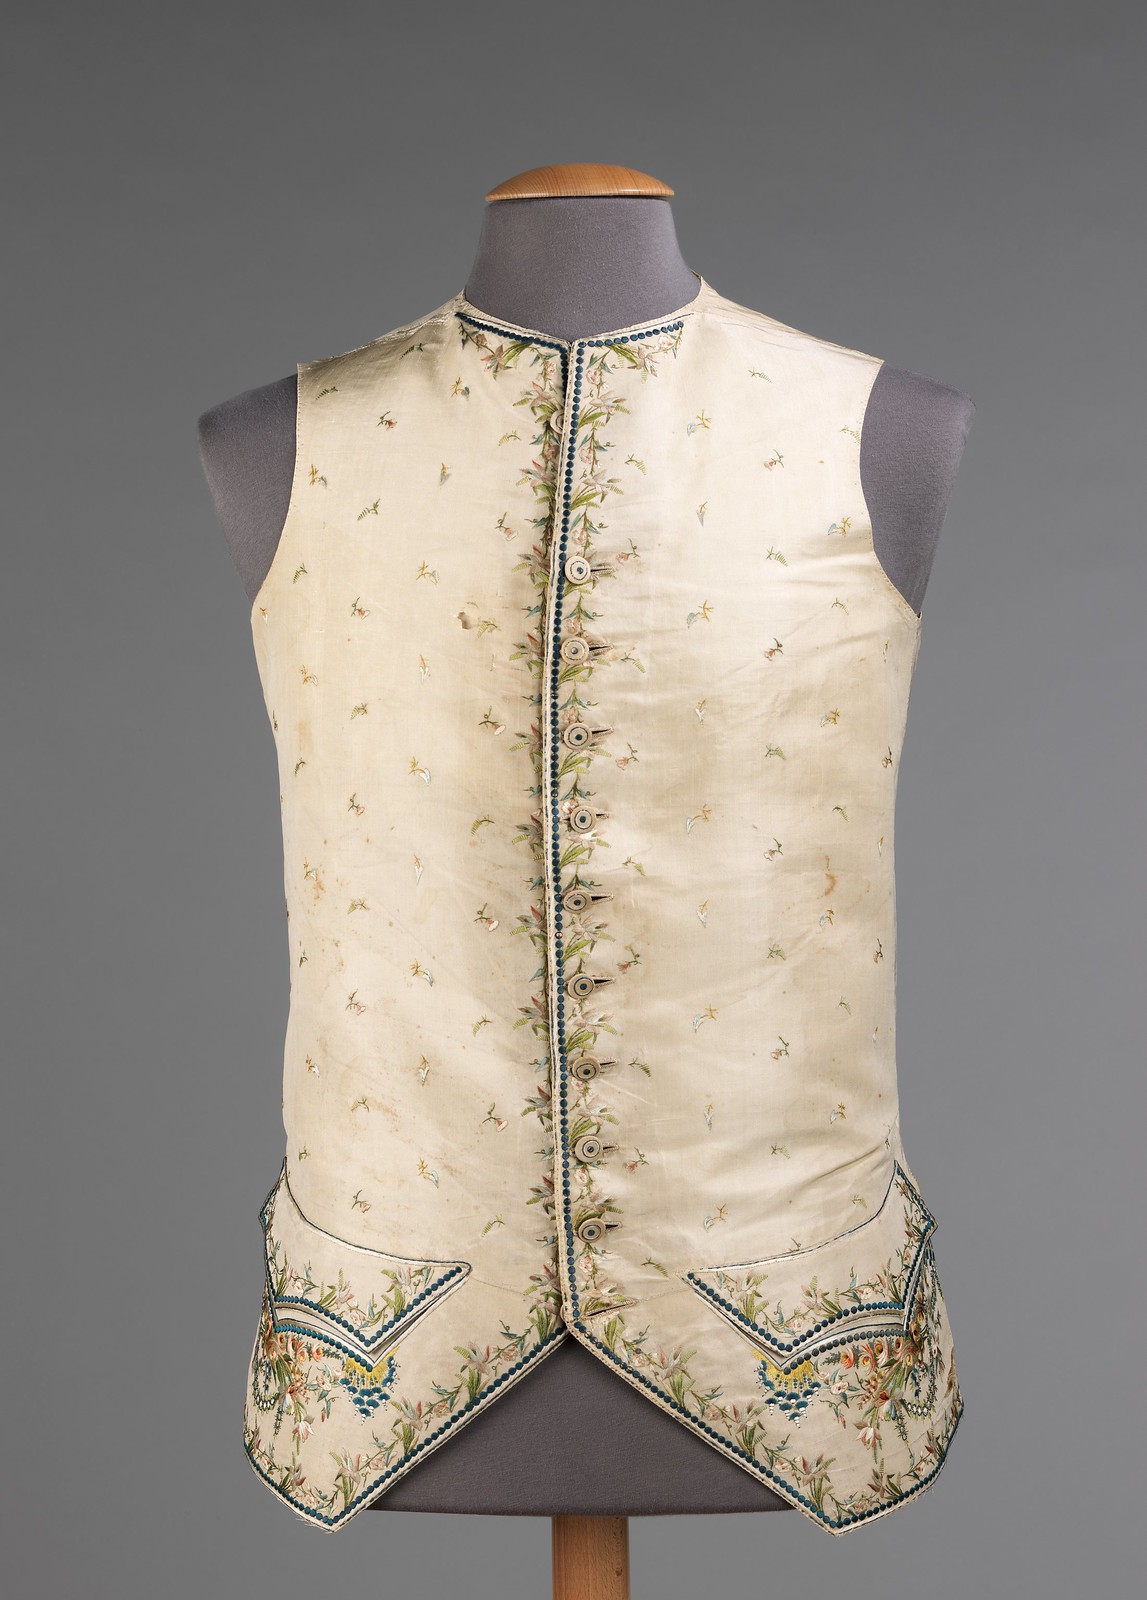 1760. French. silk, cotton. metmuseum